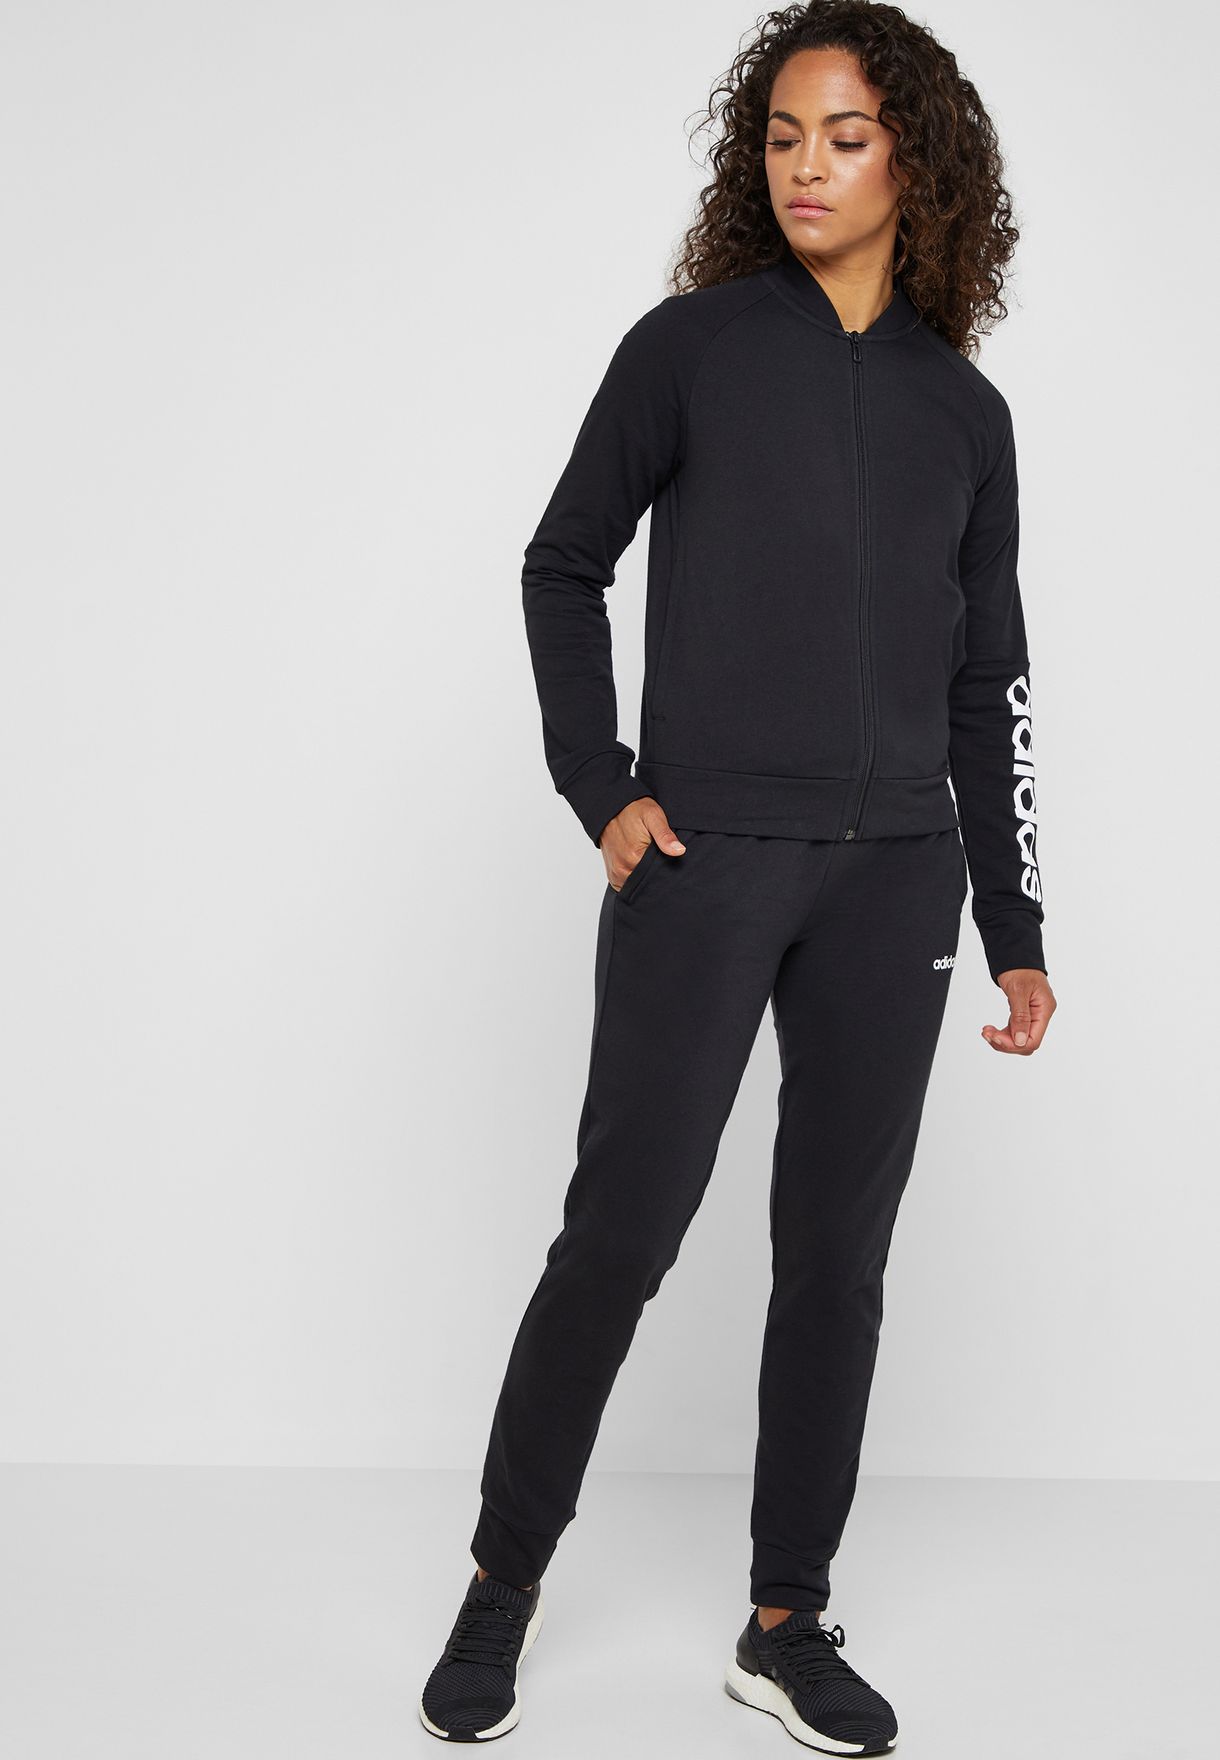 Buy adidas black Linear TrackSuit for 